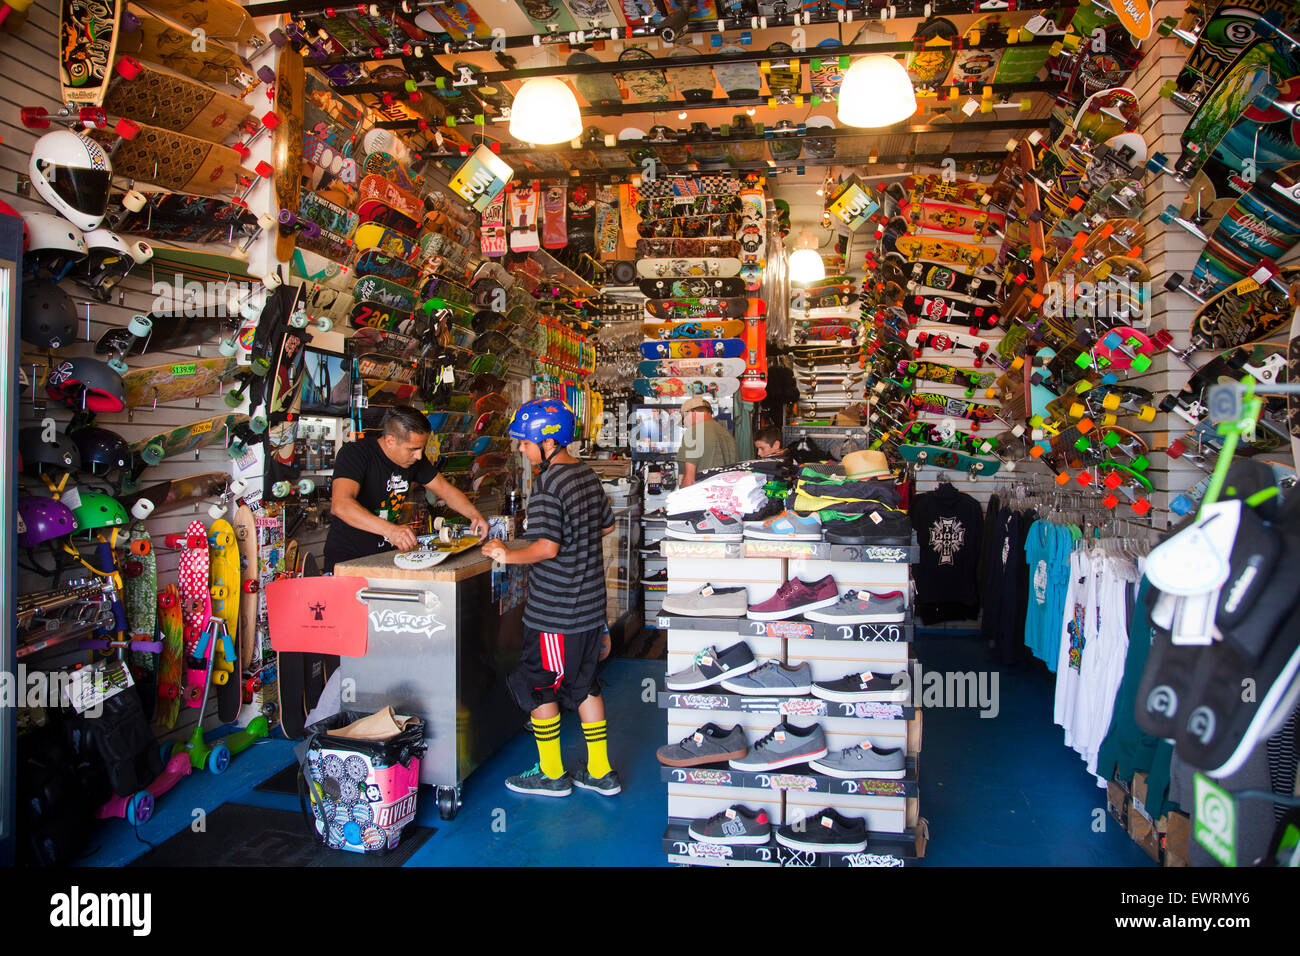 Skateboard Shop High Resolution Stock Photography and Images - Alamy